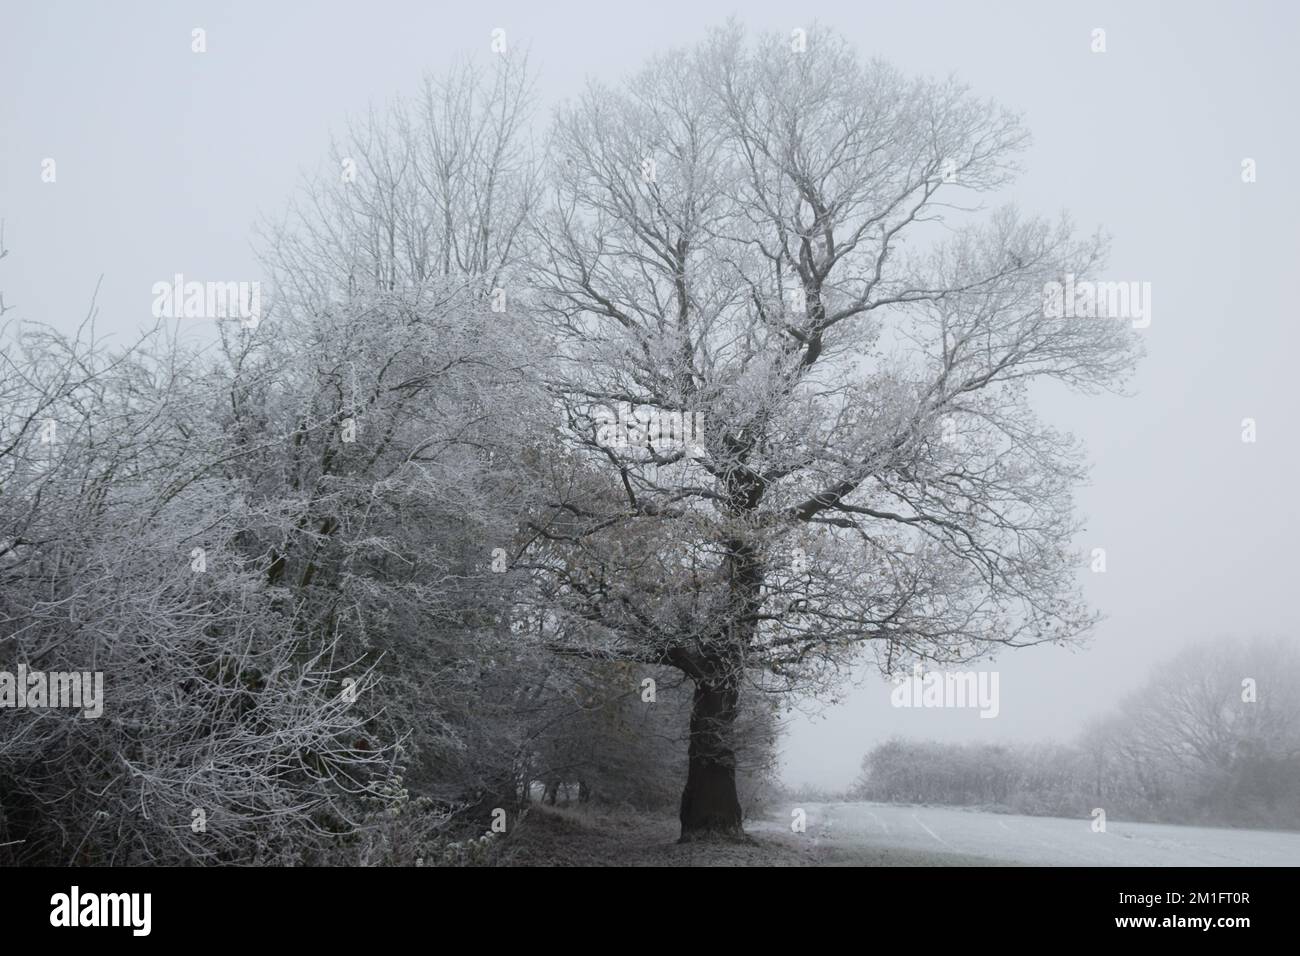 Winter wonderland scene with hoar frost bedecking the trees surrounded by cold frozen air. Stock Photo